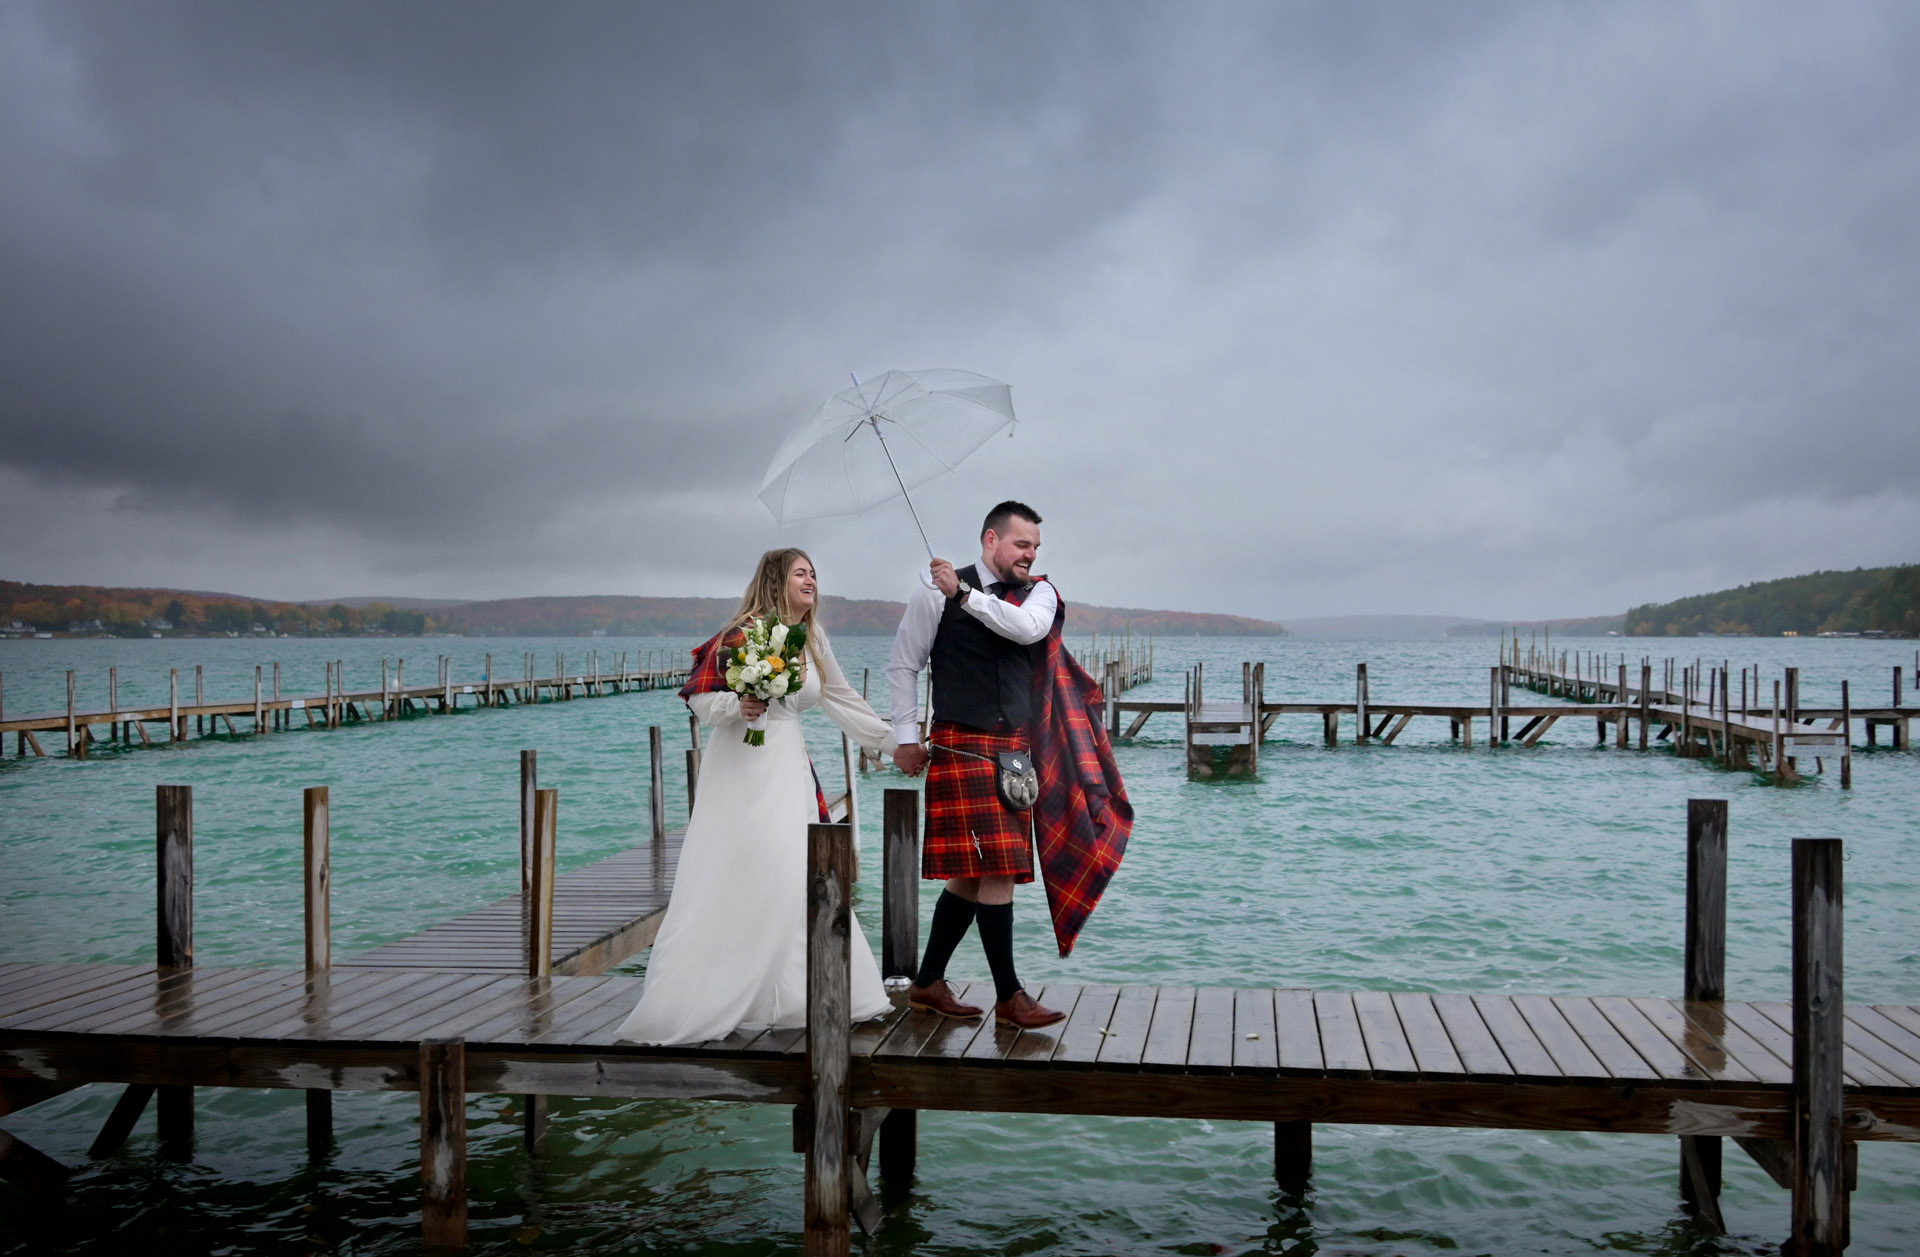 The groom sort of tries to keep his bride dry during their wet destination in Northern Michigan on Walloon Lake during a soggy fall wedding.